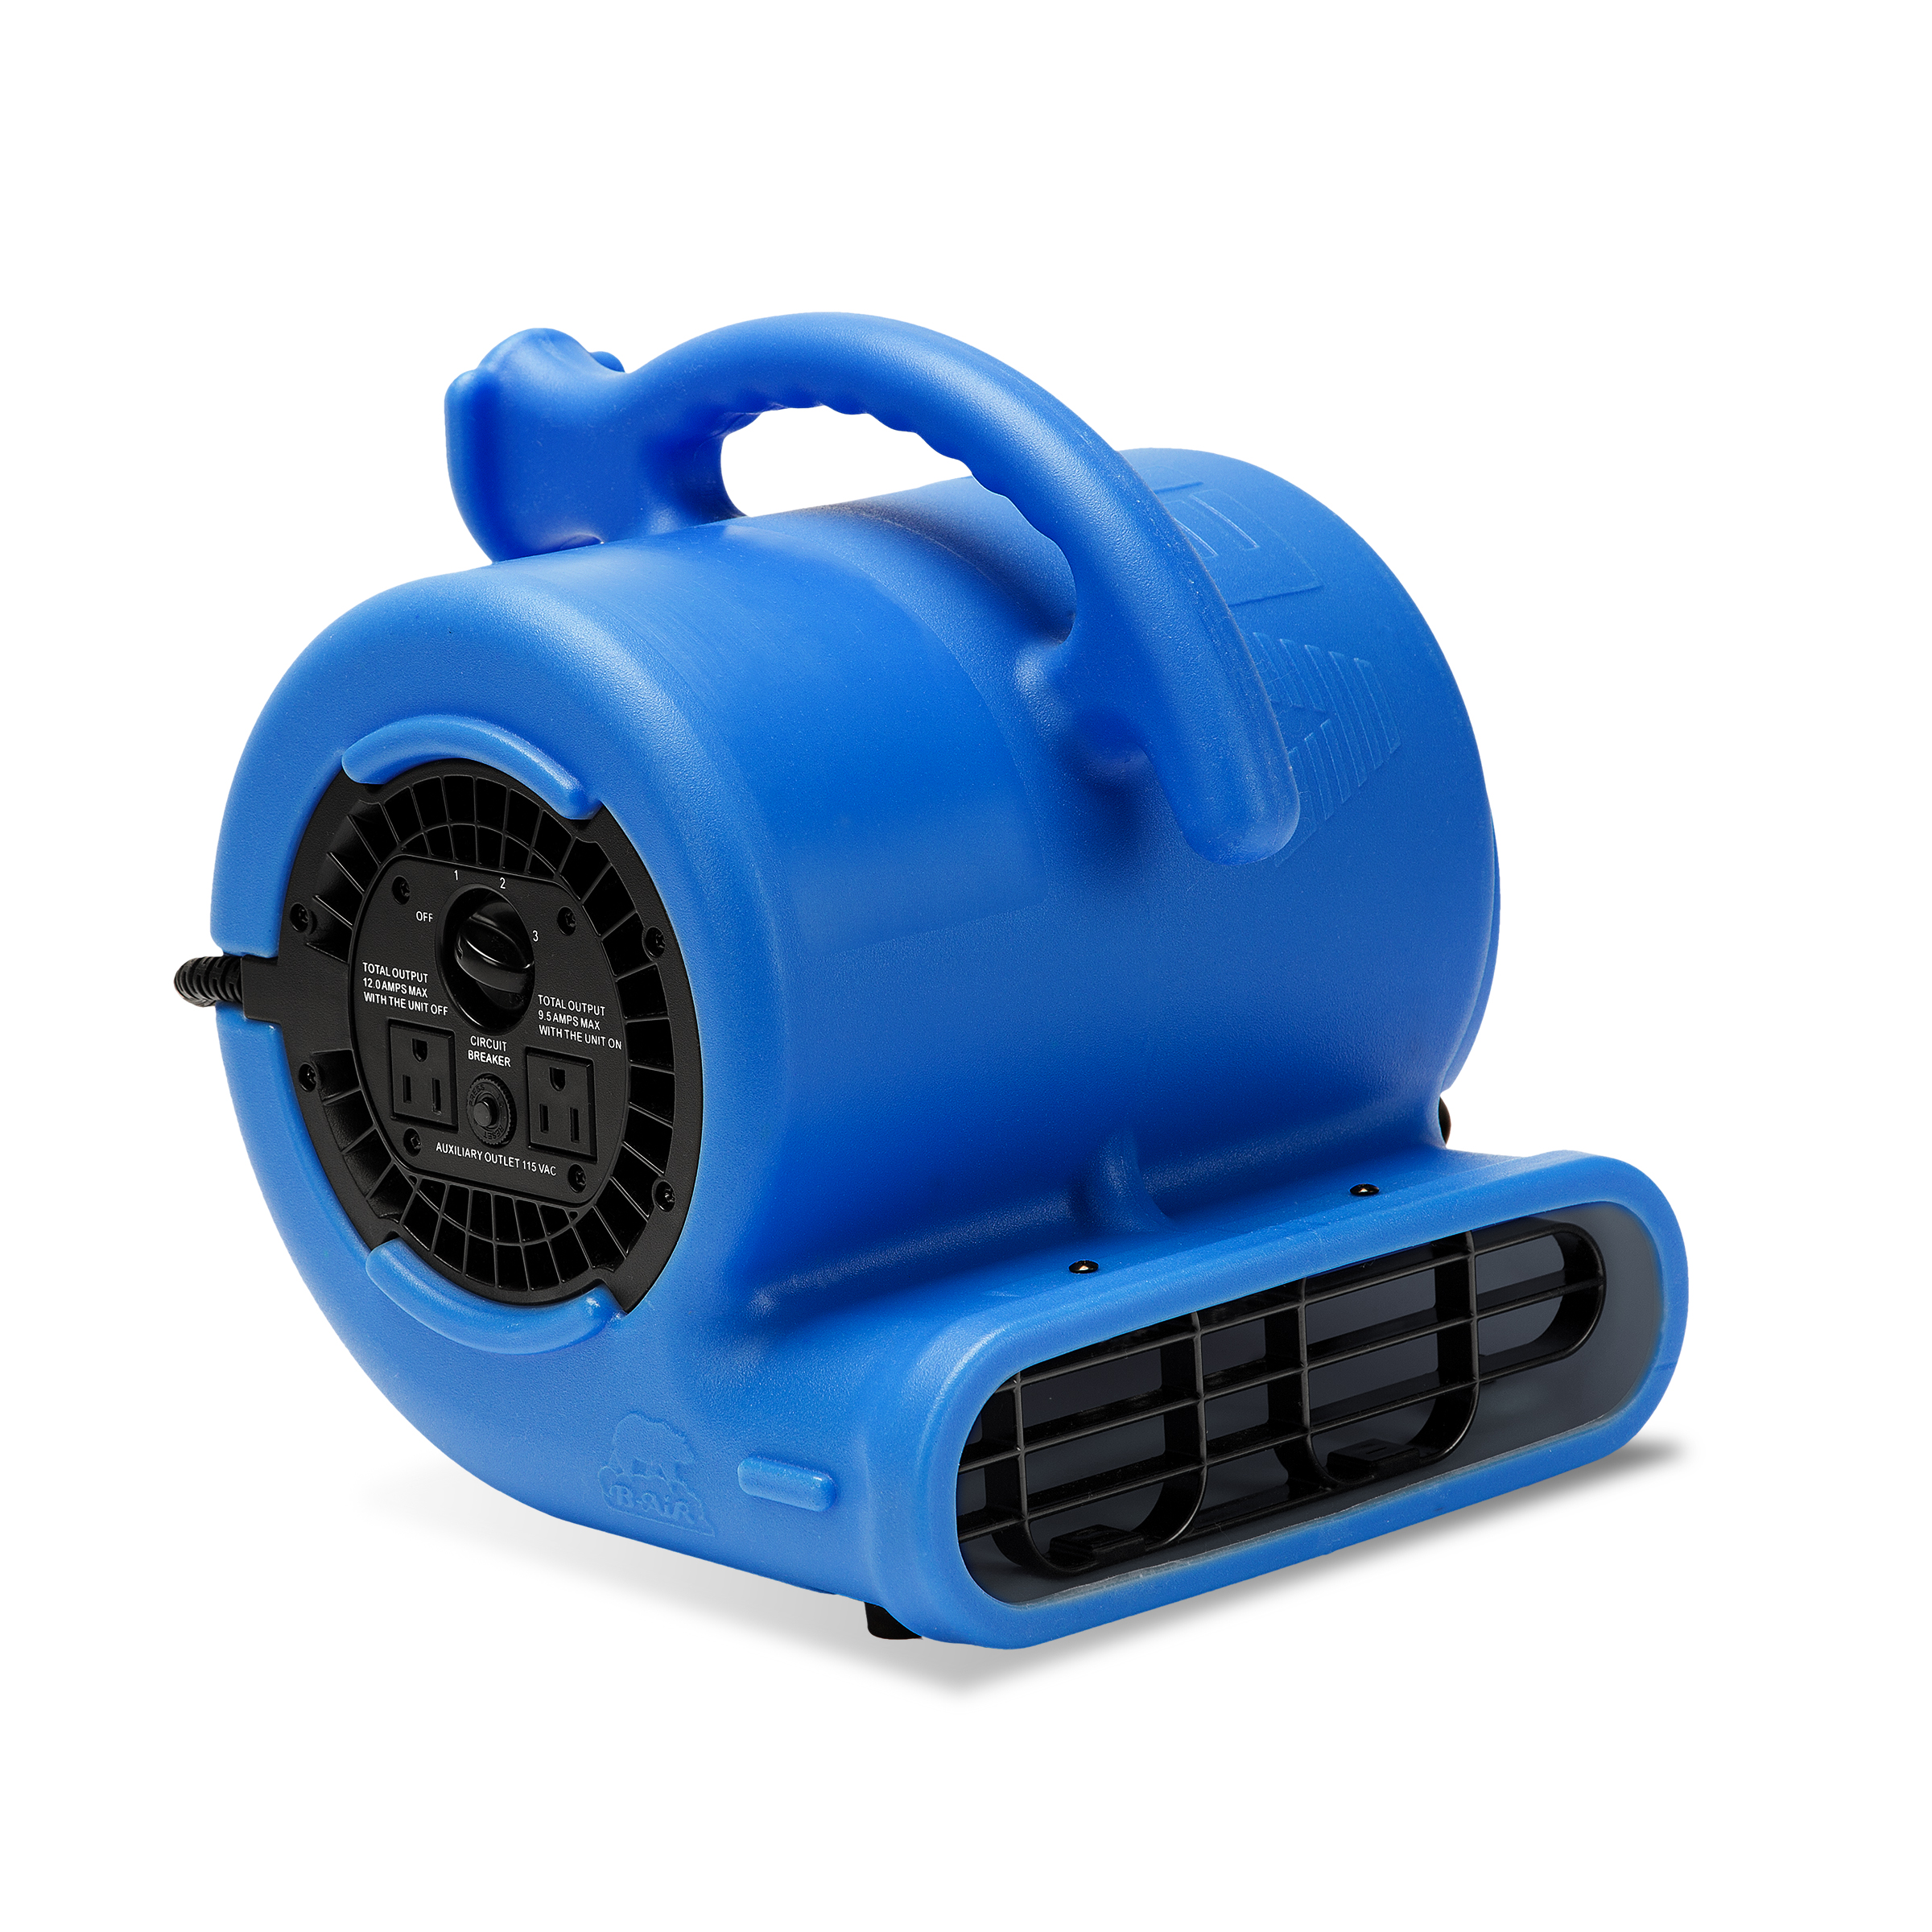 BLOWER AIR COMPACT 1.5AMPS